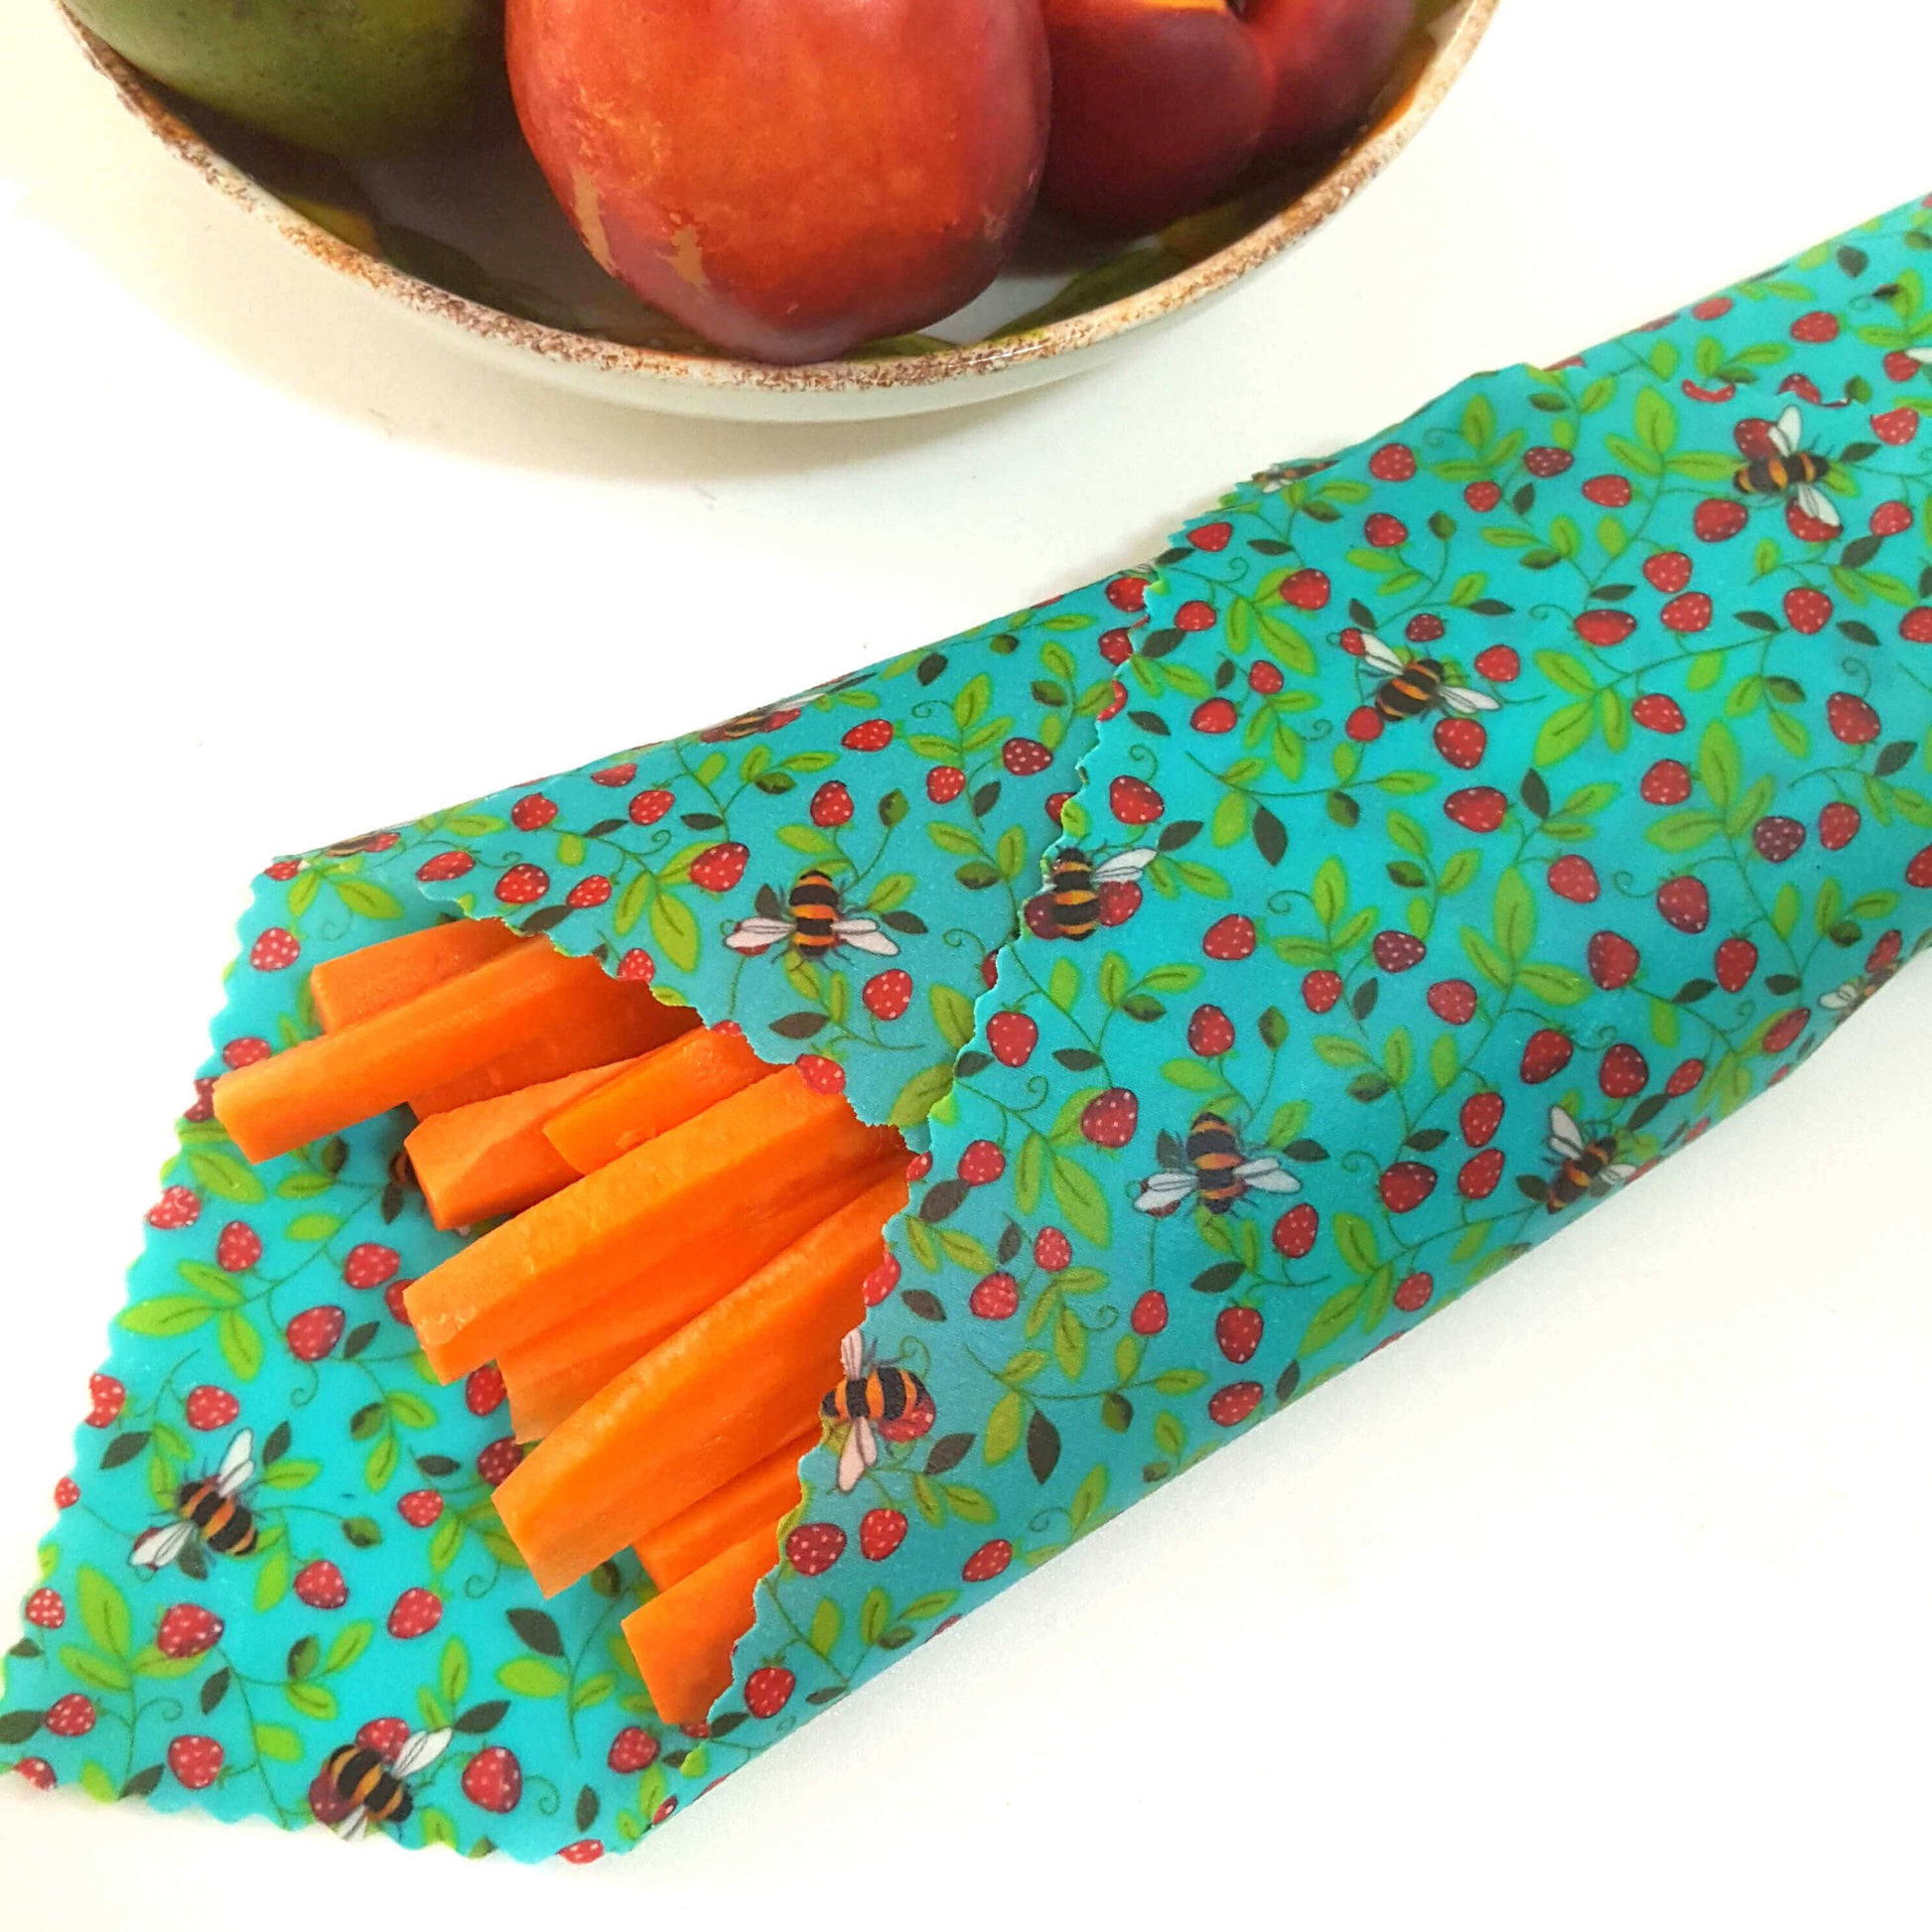 Reusable Beeswax Food Wraps 100% Hand Made in the UK by Honey Bee Good. Planet-Kind single large beeswax wrap in Strawberry Bees pattern as flatlay with carrots